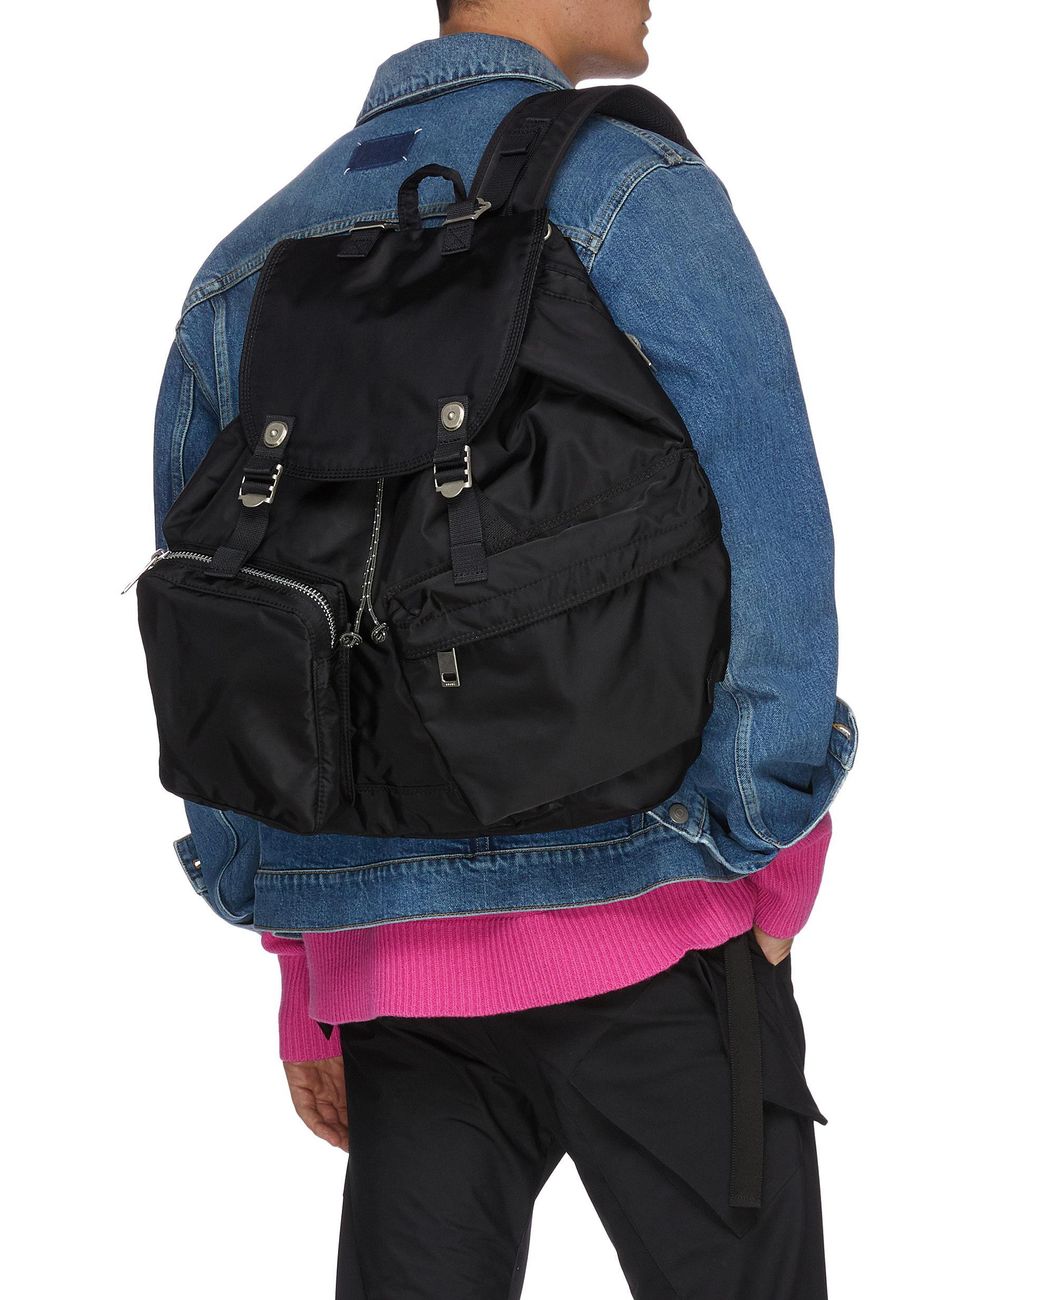 sacai x PORTER Double Pocket Backpack - リュック/バックパック